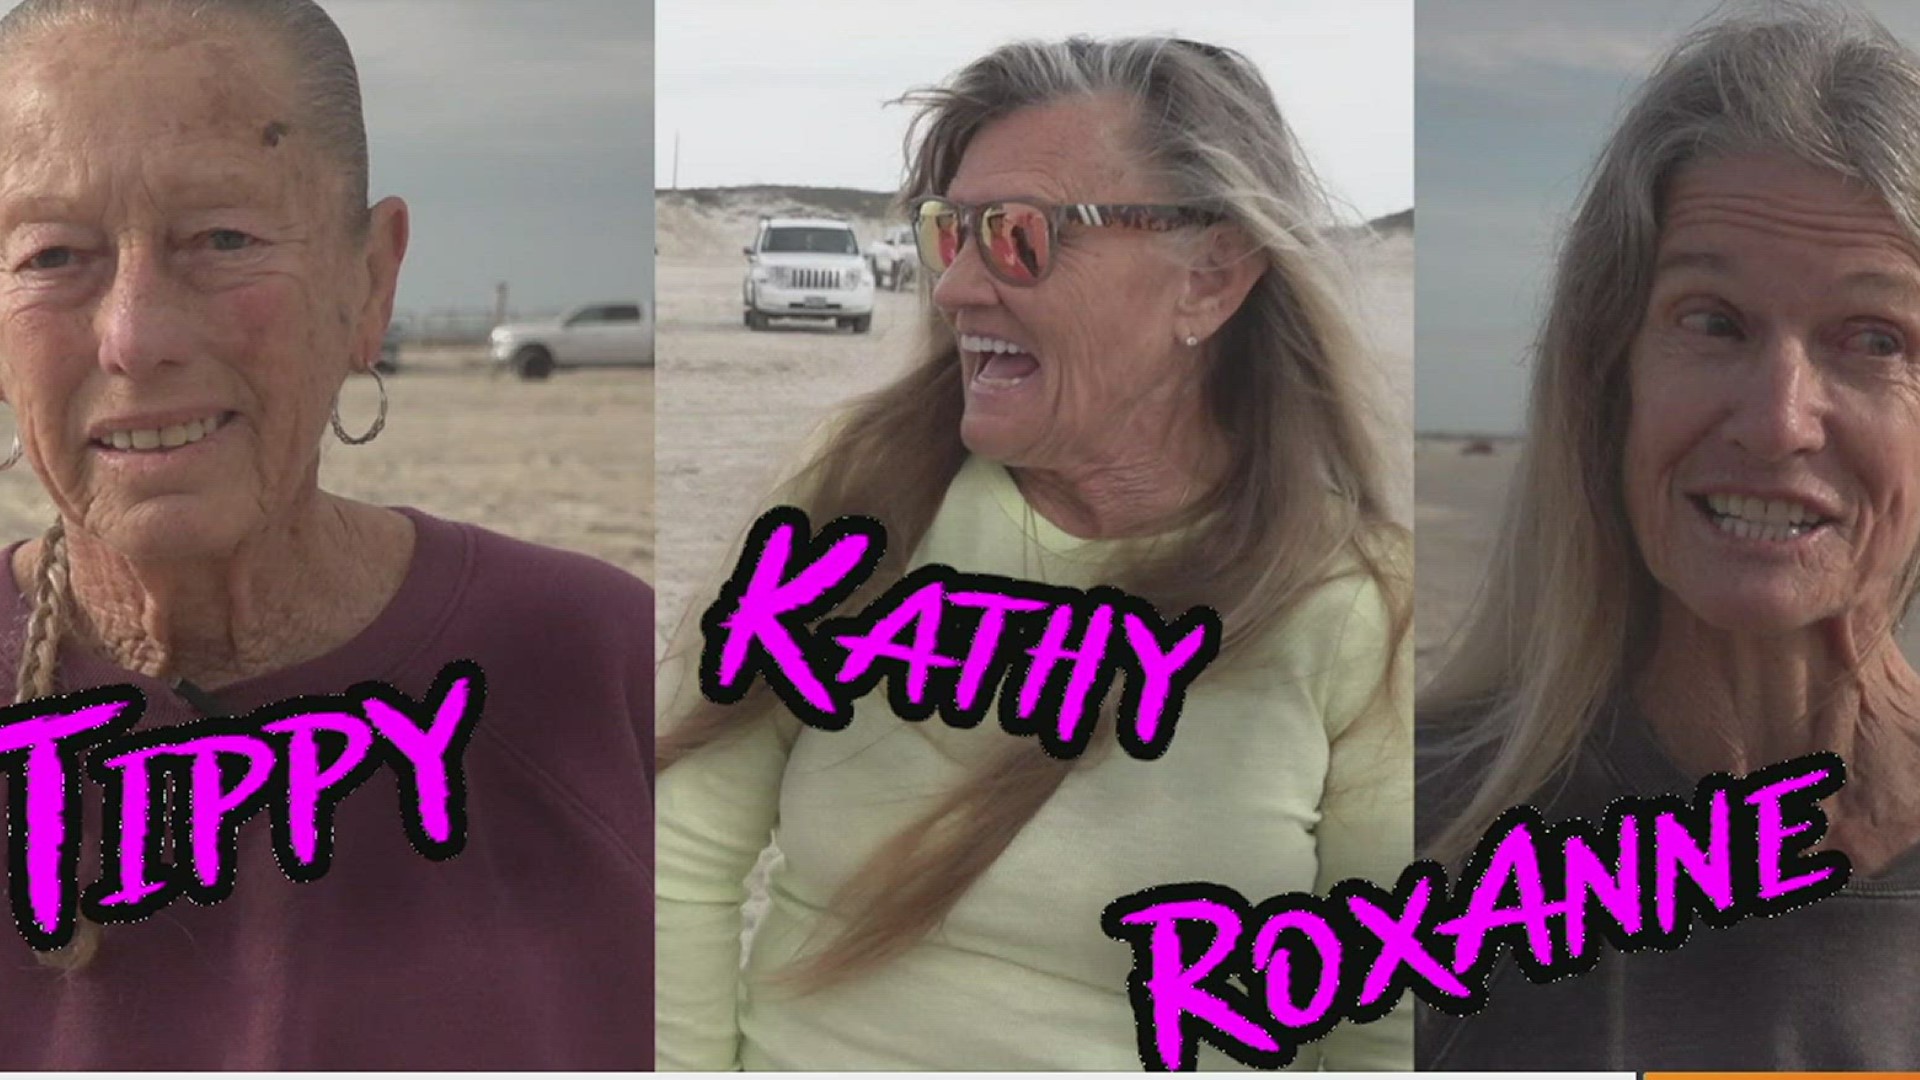 Tippy Kelley, Kathy Rogers & RoxAnne Schlabach are just a few of the women who first paddled into the waters when surfing made its way to Texas in the 60's and 70's.